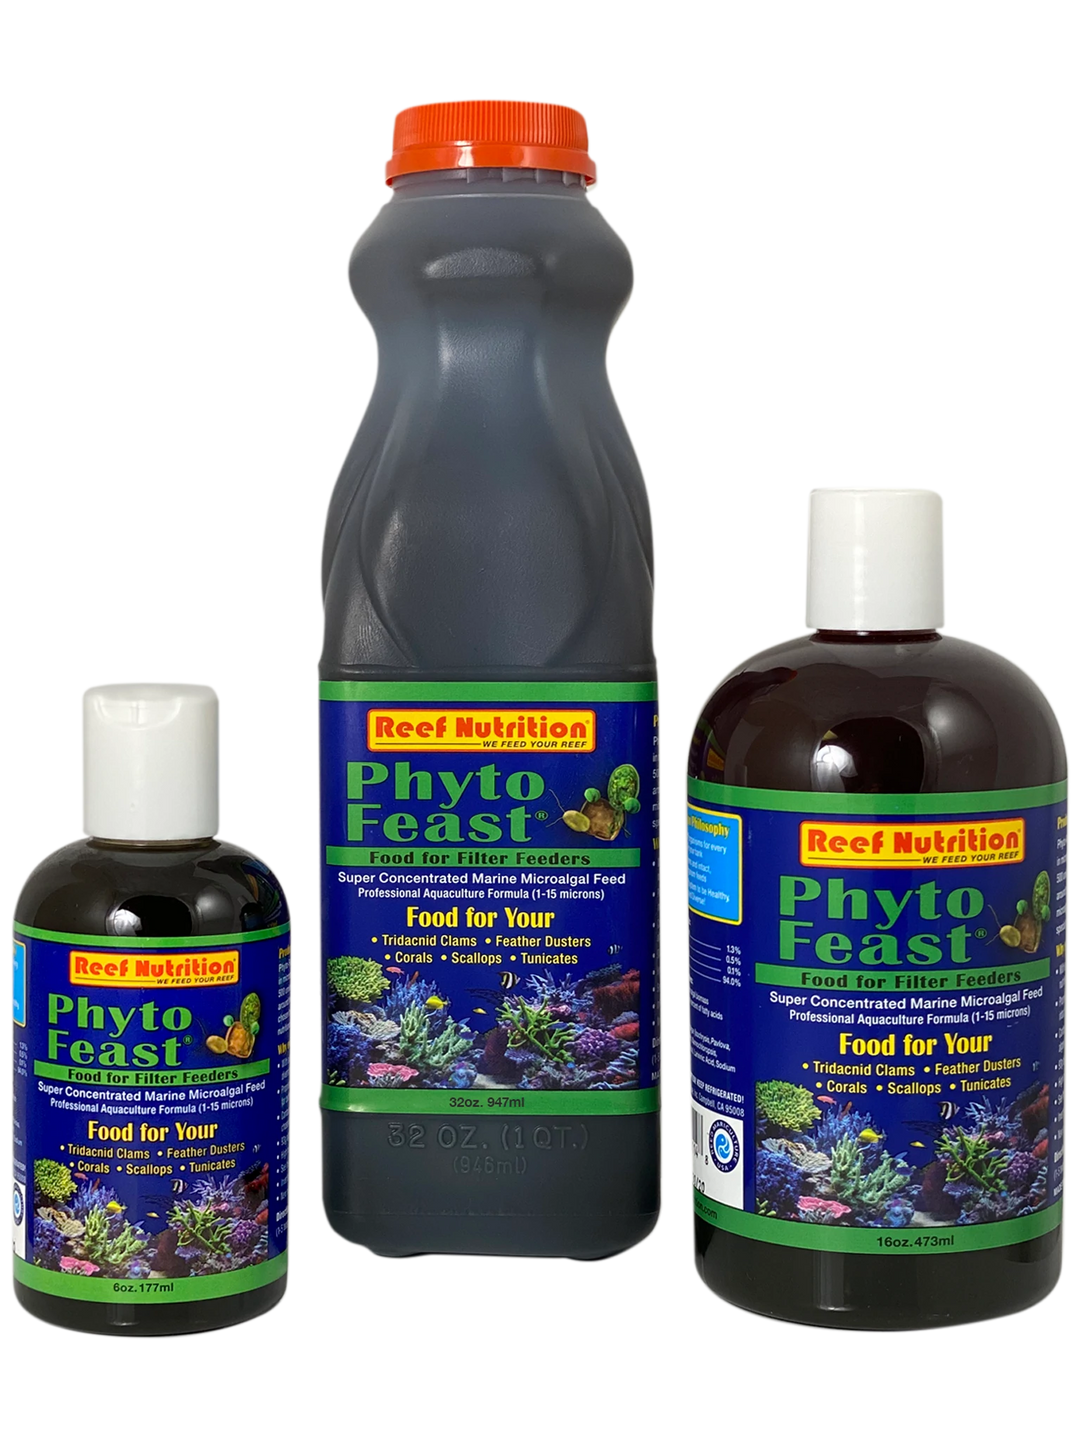 Reef Nutrition - Phyto Feast - 6oz, 16oz, 32oz Phytoplankton Concentrate